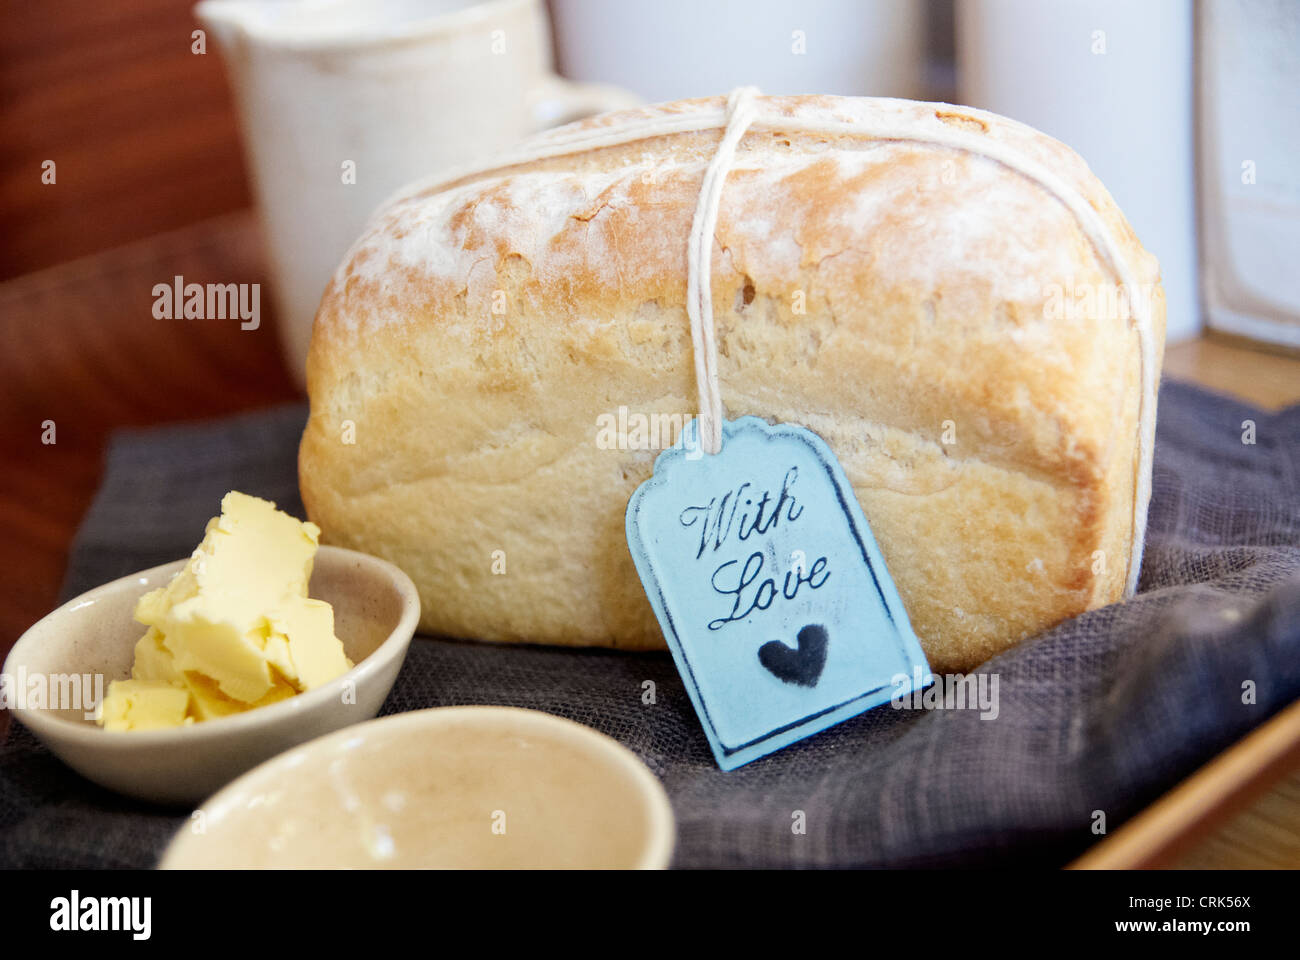 Loaf of bread with butter on cloth Stock Photo